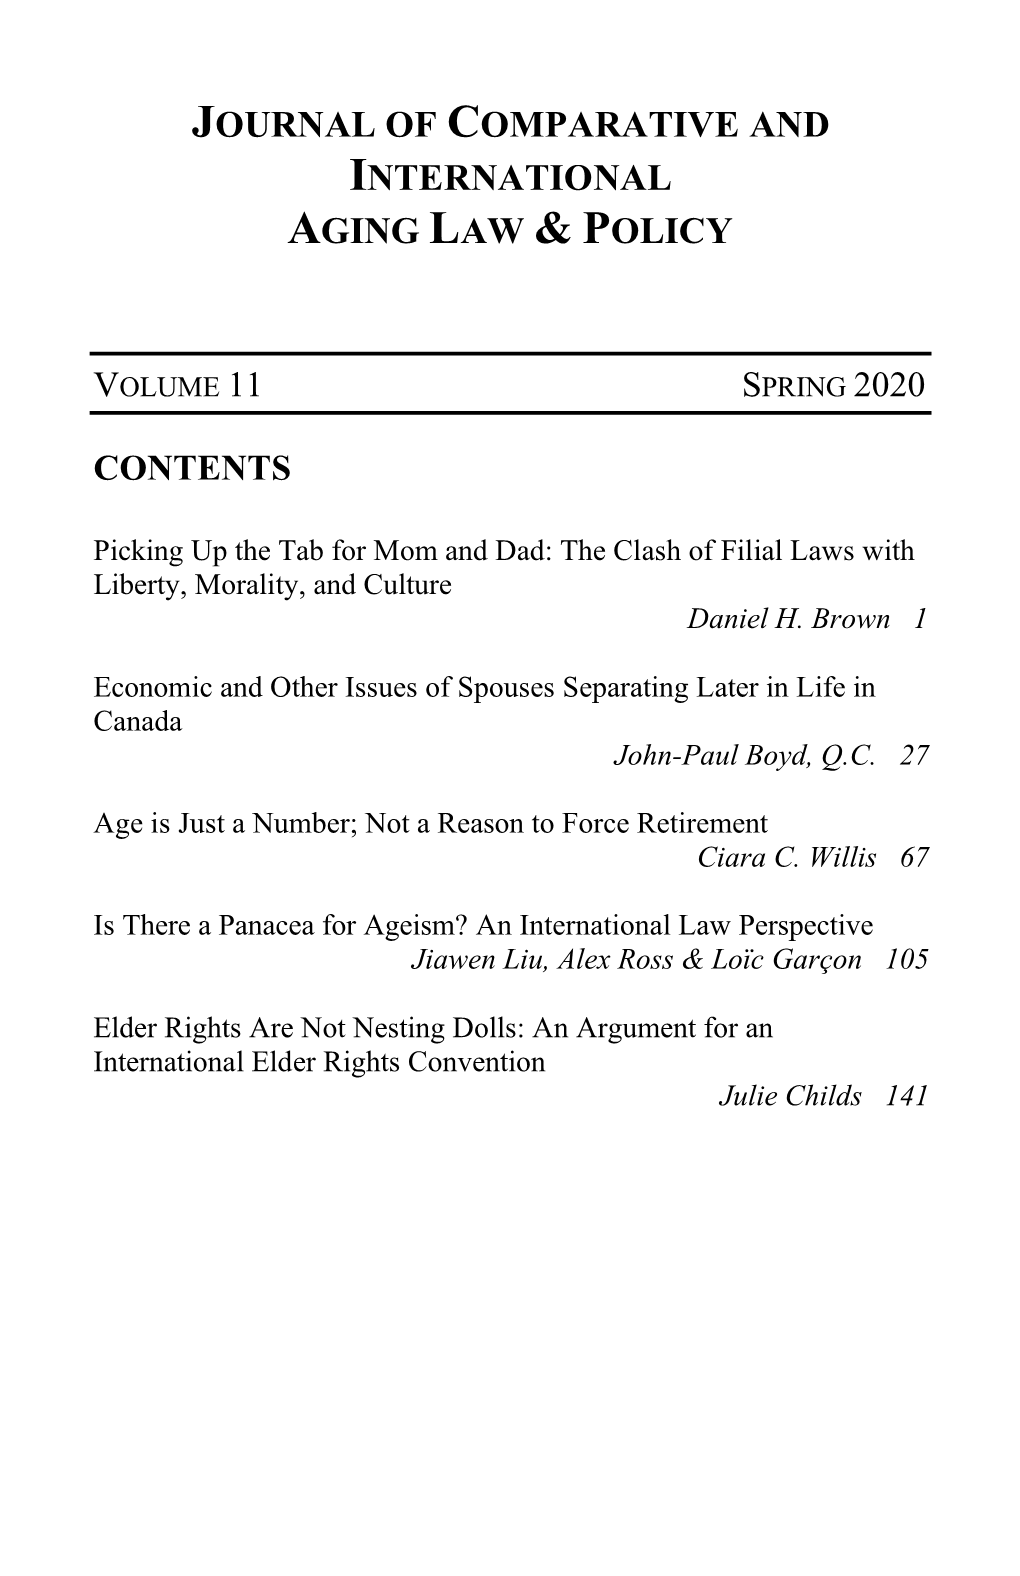 Journal of Comparative and International Aging Law & Policy